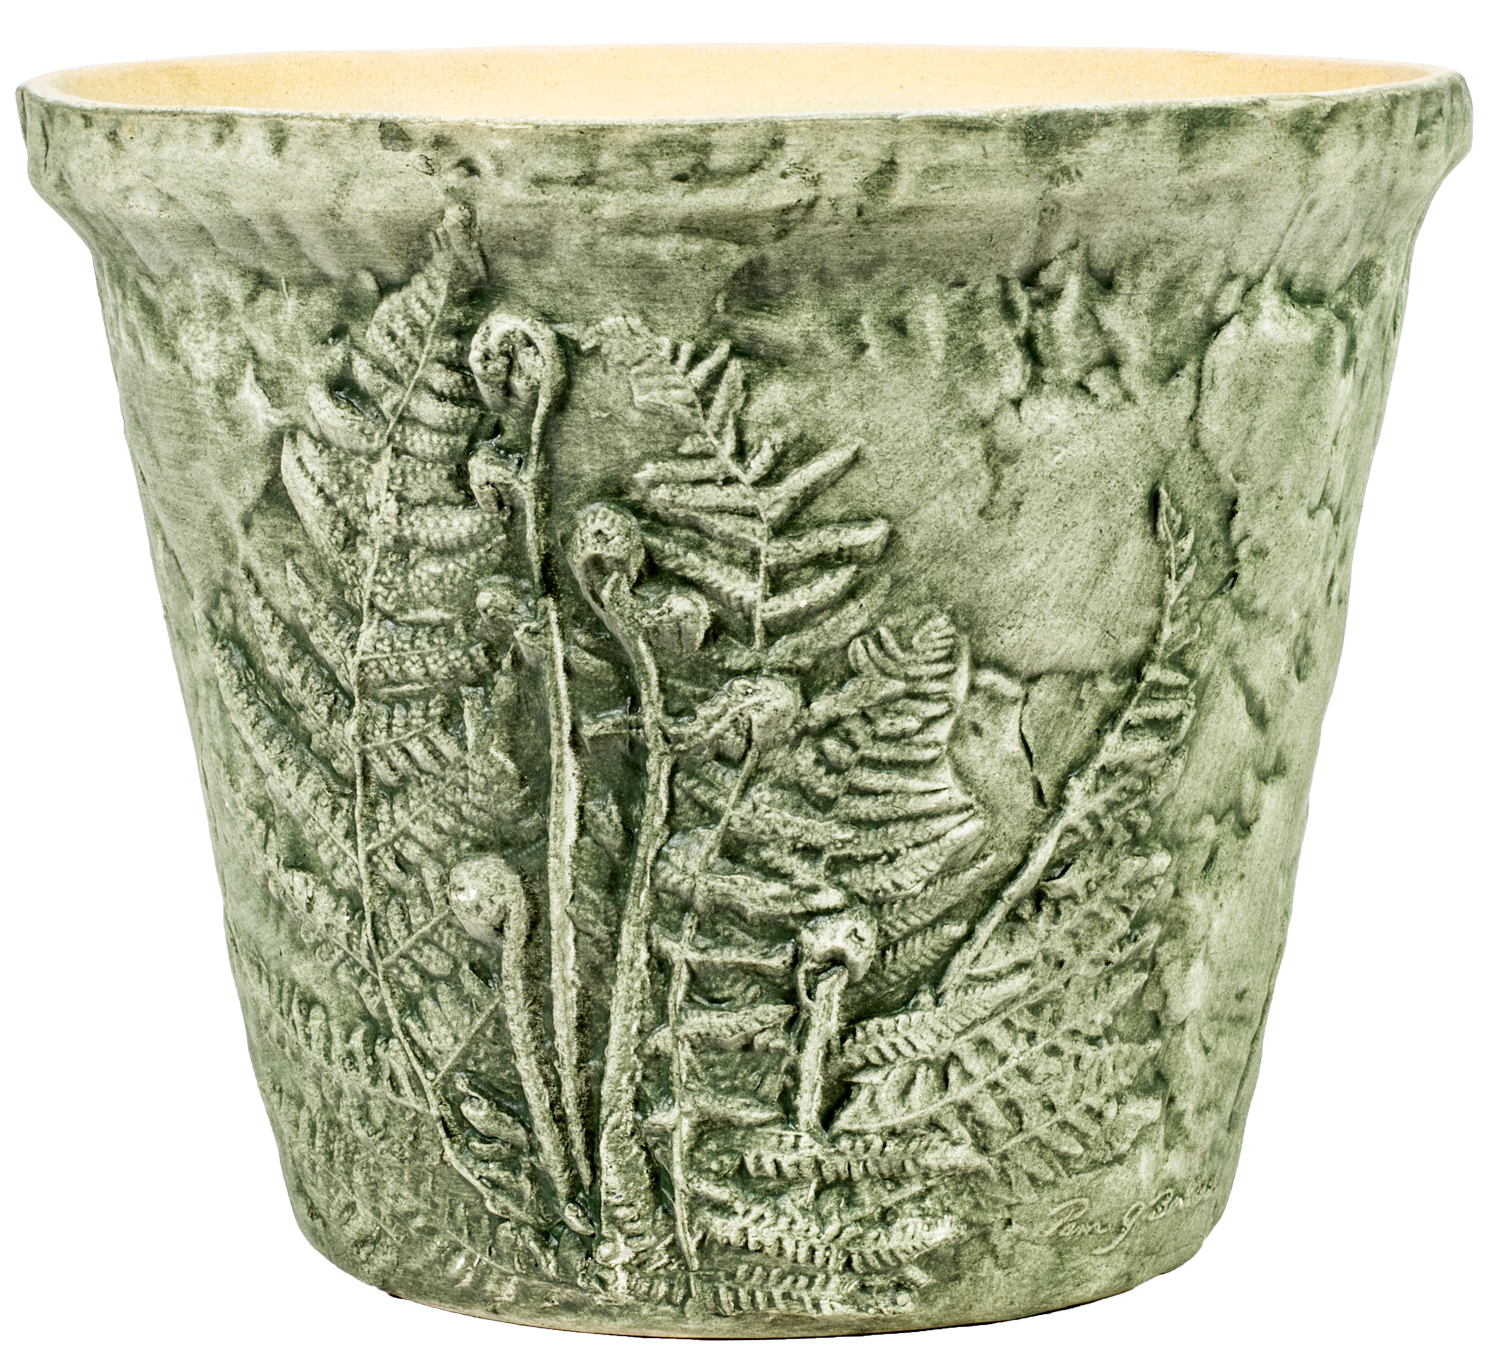 large green aged ceramic planter with ferns embedded 